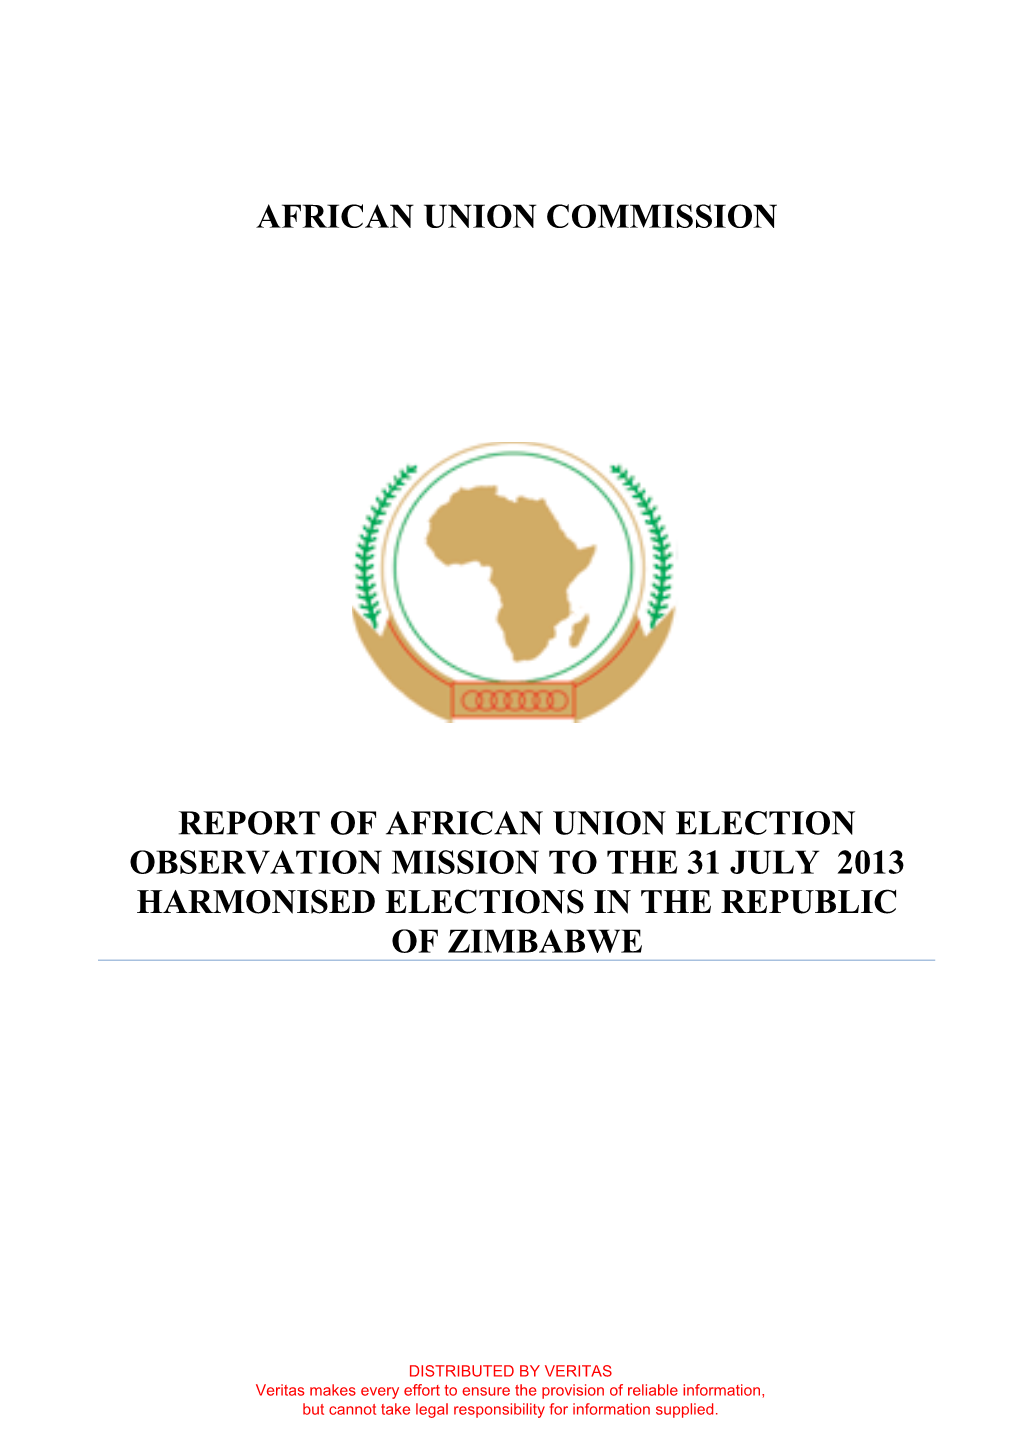 African Union Election Observation Mission Report: Zimbabwe 2013